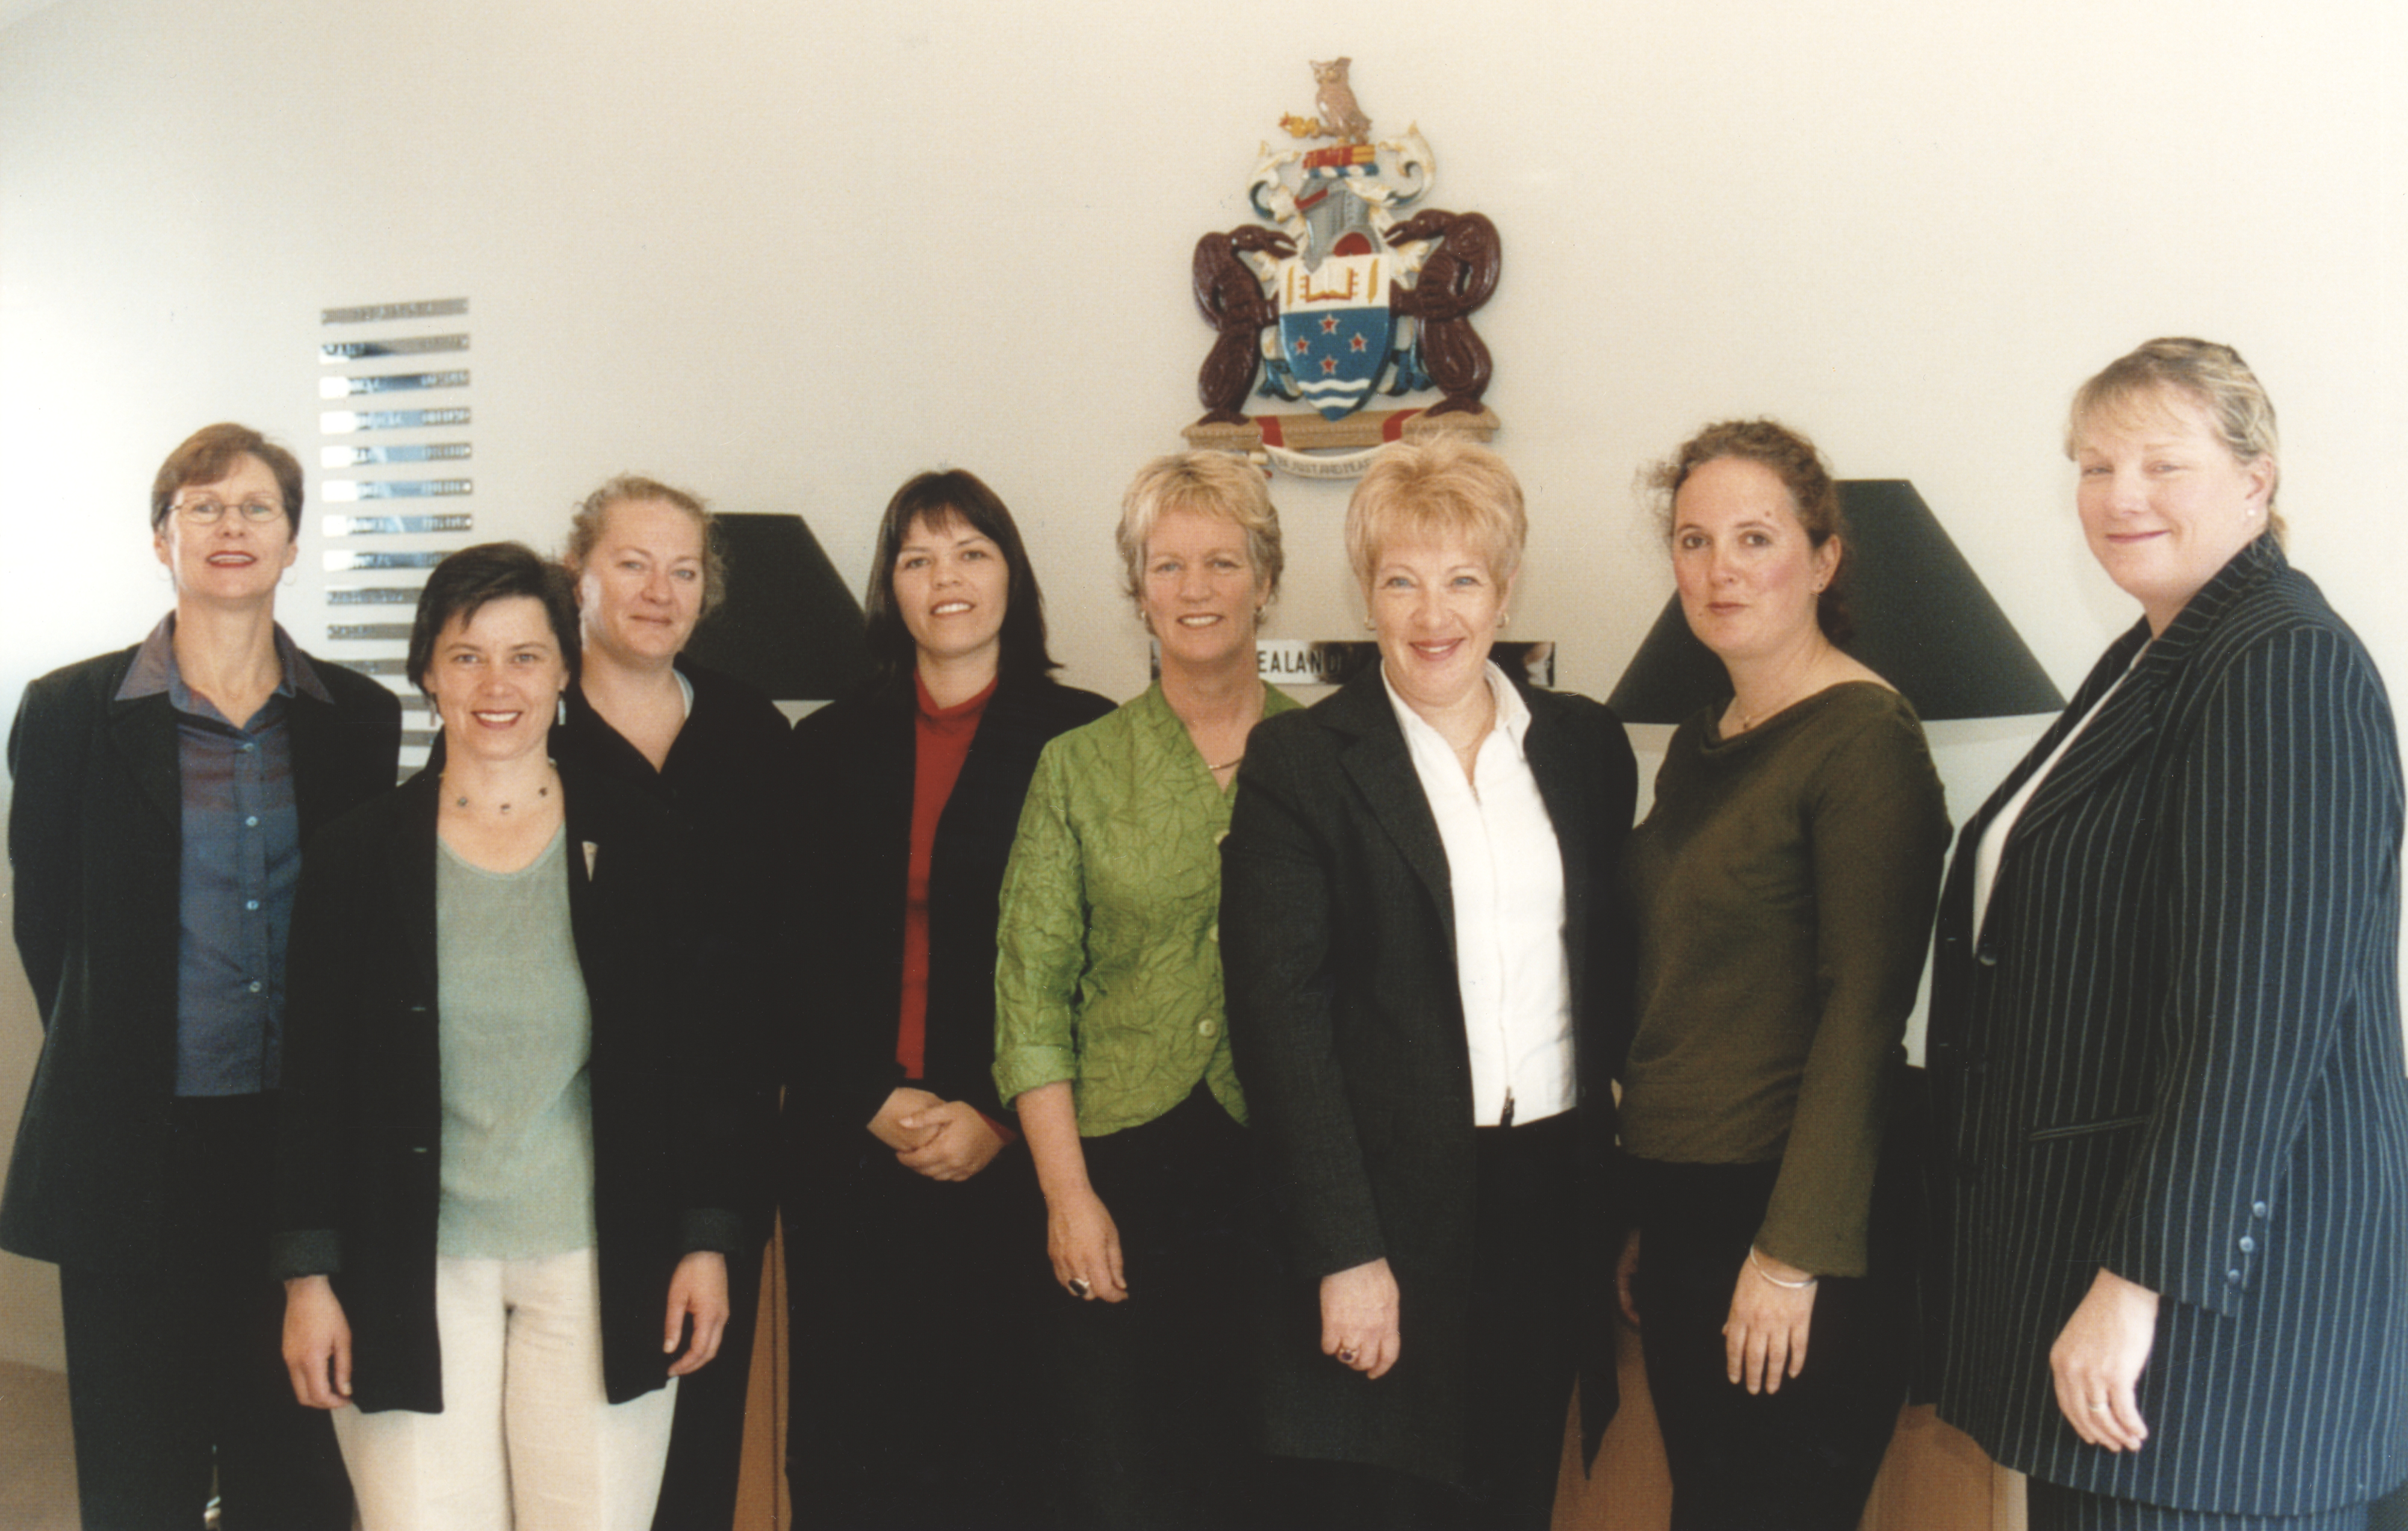 From left to right are Wendy Macphail, Joy Liddicoat, Vicki Thorpe, Nicole Walker, Julia O'Connor (on behalf of Jane Hunter), Kathryn Buchanan, Colleen Newton and Fiona Butland (who was also secretary). Missing from the photo are Emma Aitken and Mary O'Dw